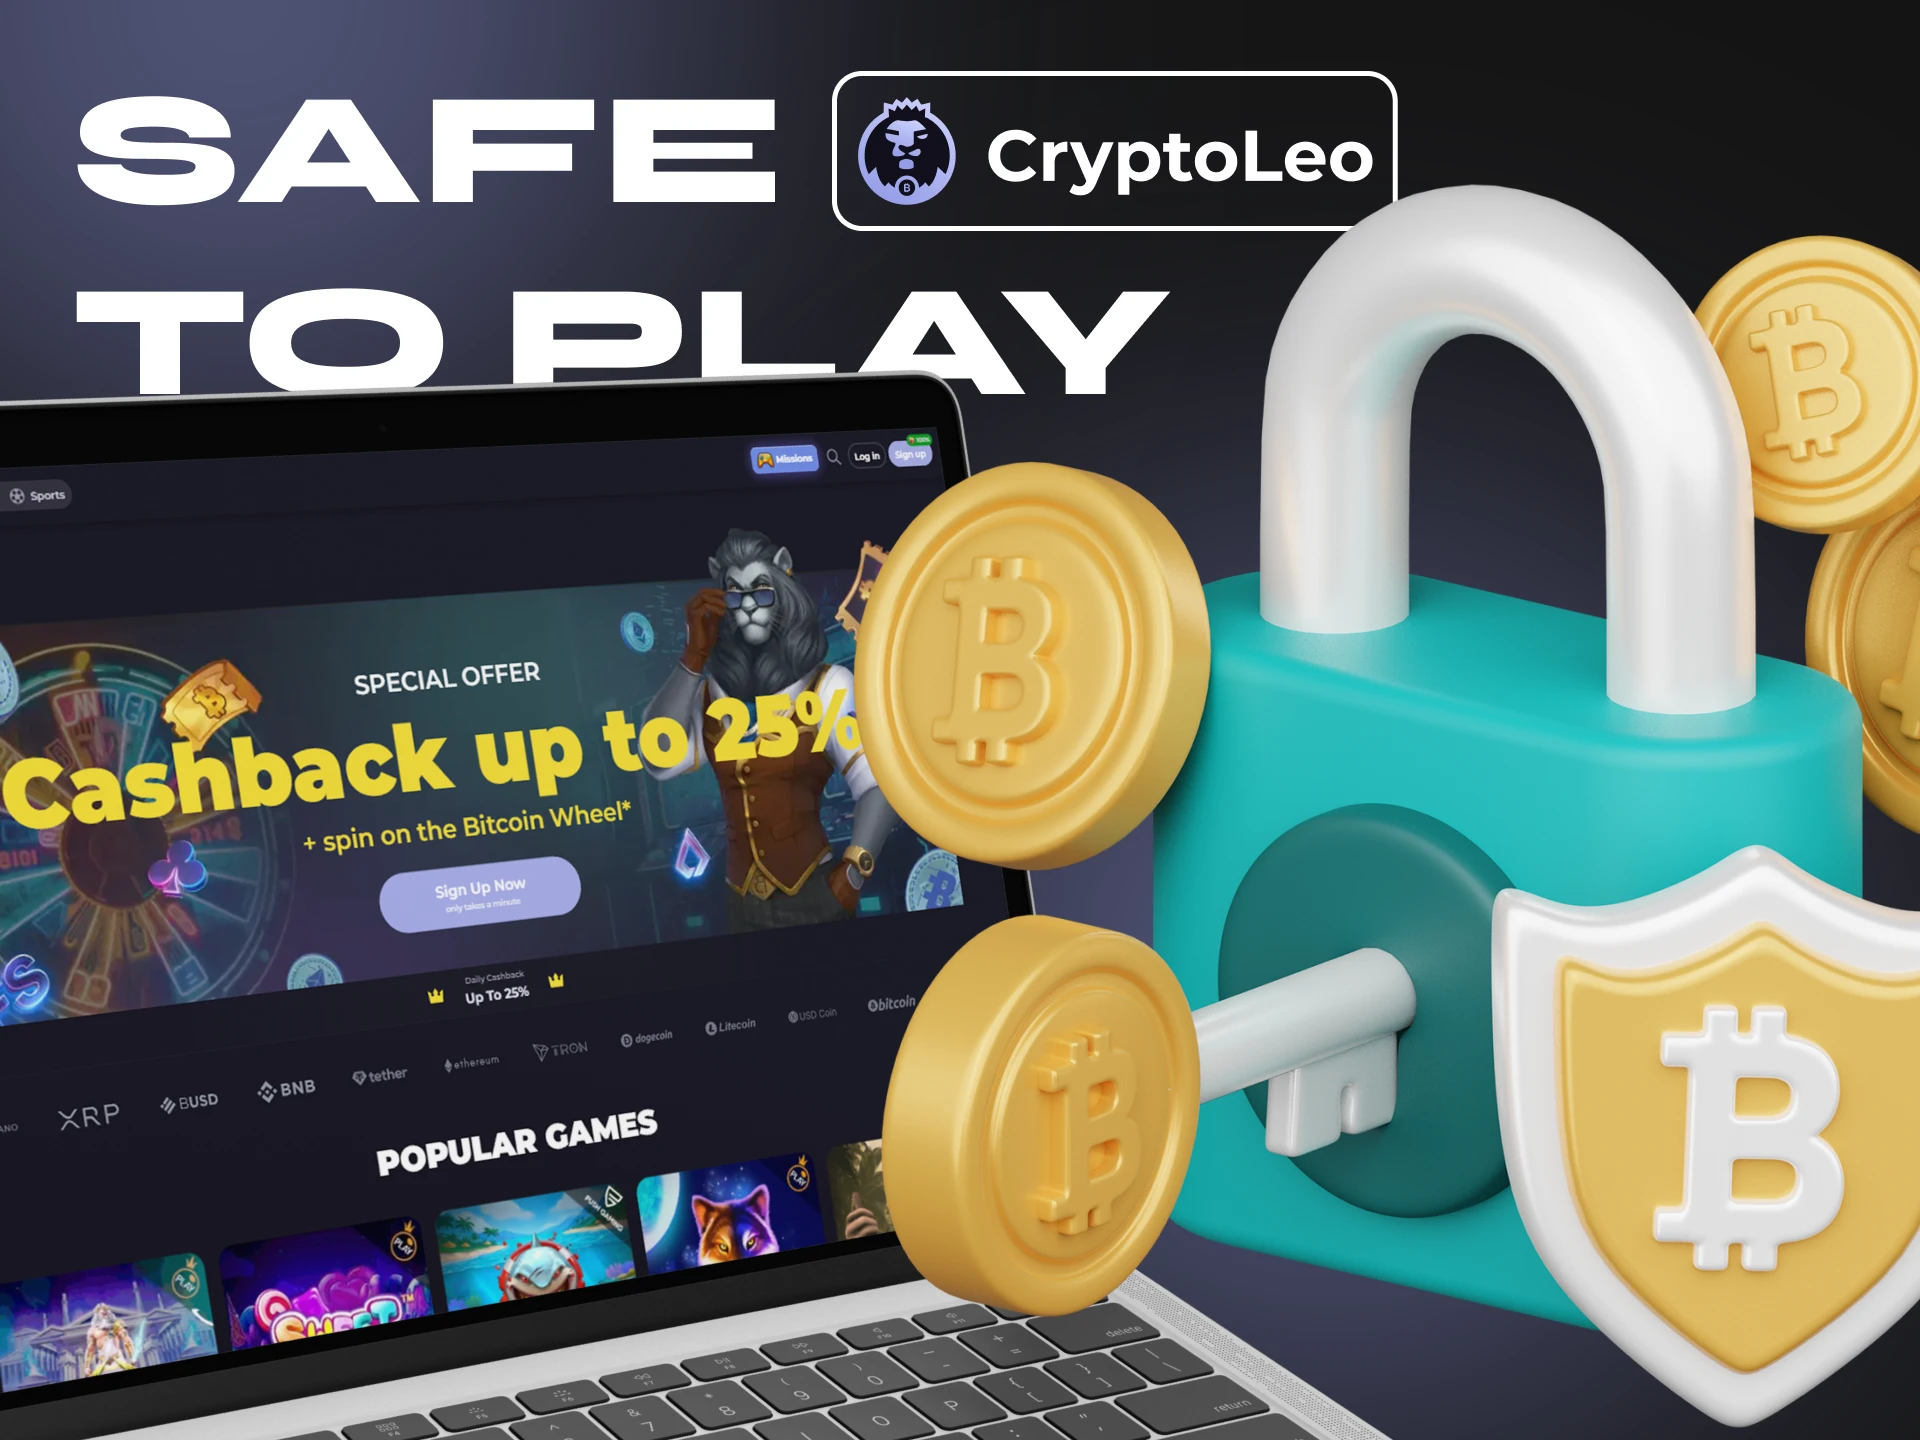 Cryptoleo protects all your personal data on the platform.